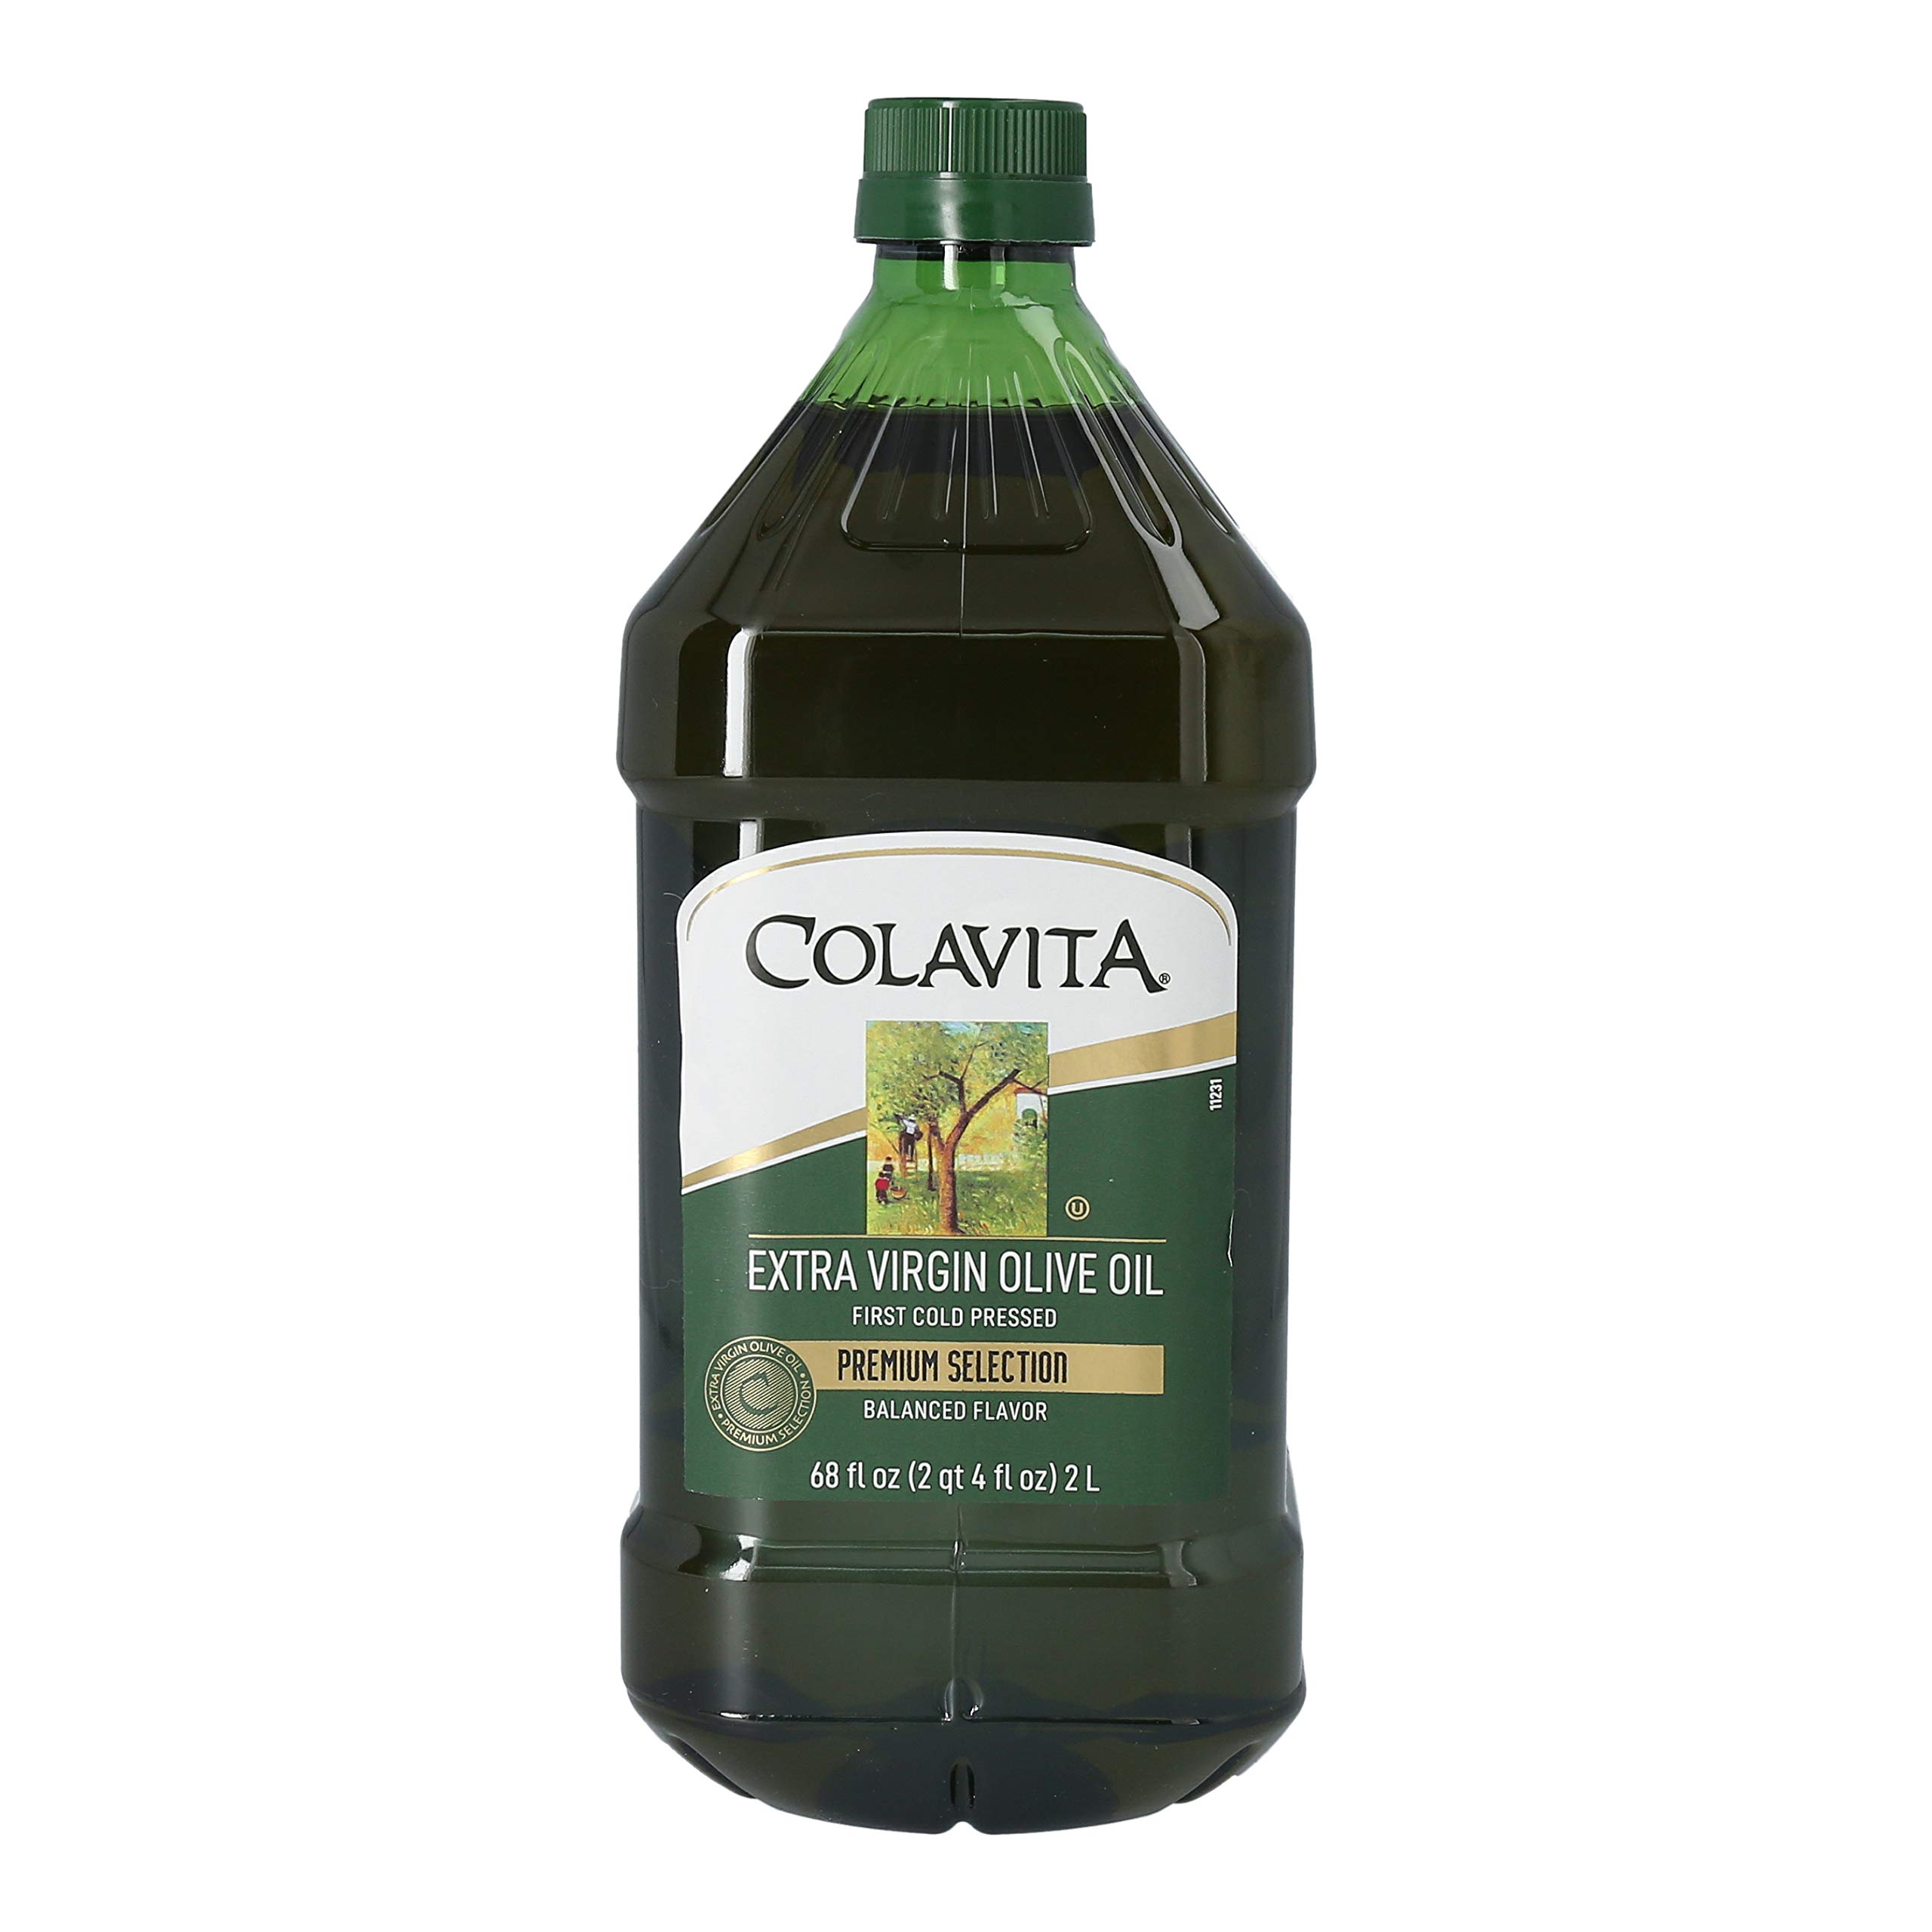 Amazon.com : Colavita Extra Virgin Olive Oil, First Cold Pressed, (2 Liters) 68 Fl Oz (Pack of 1) : Grocery & Gourmet Food $17.80